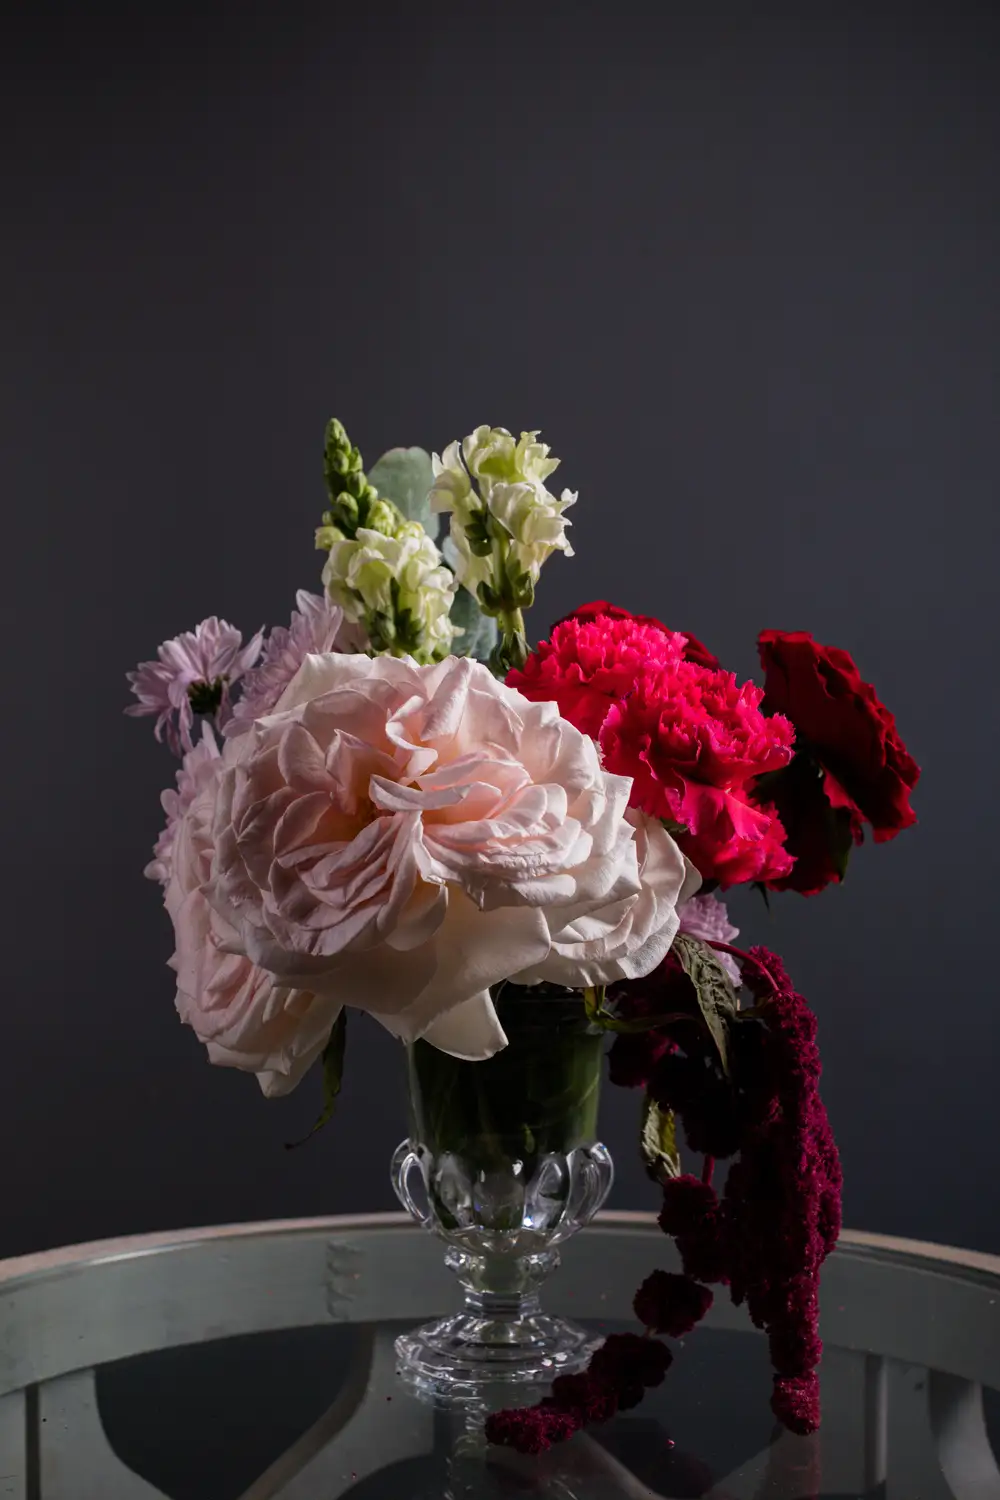 Decorative Flowers in a glass container